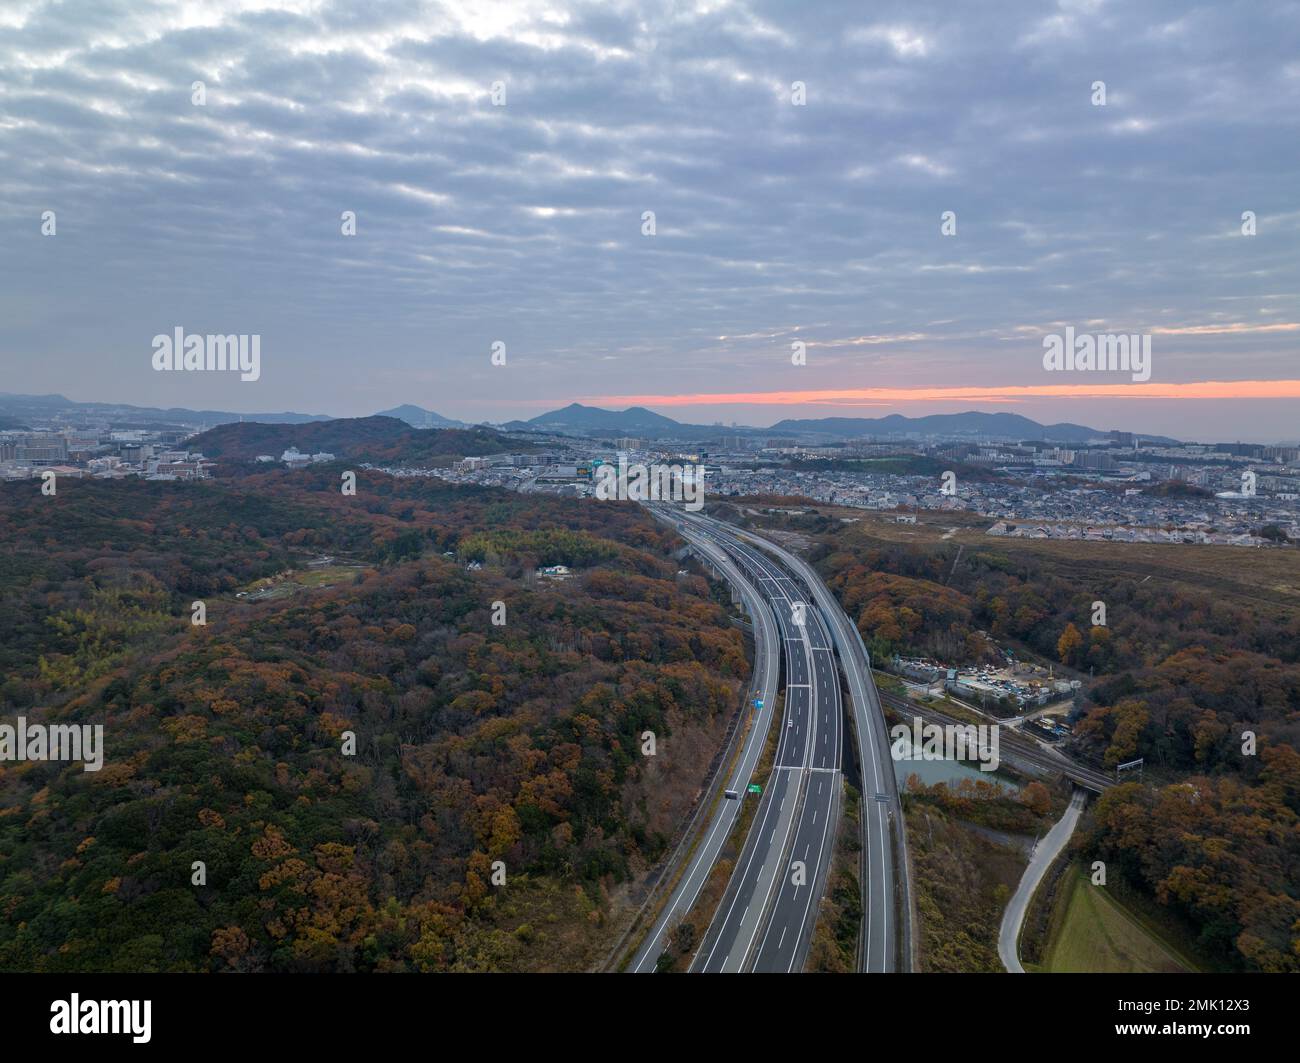 Empty road toward distant hills with predawn color in sky Stock Photo